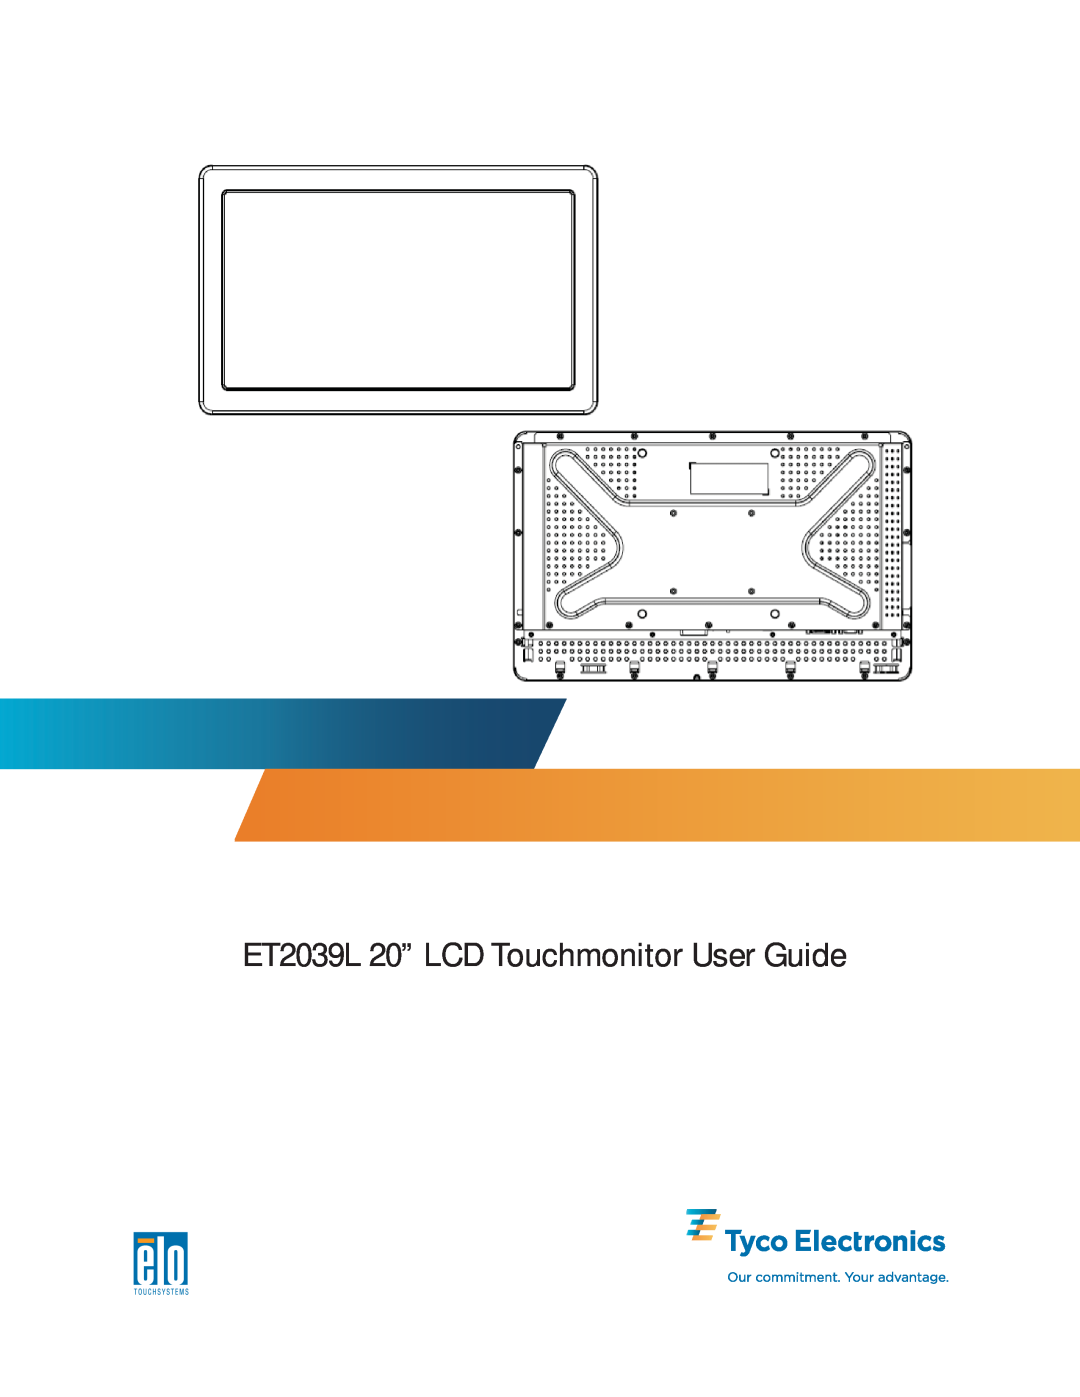 Elo TouchSystems manual ET2039L 20” LCD Touchmonitor User Guide 